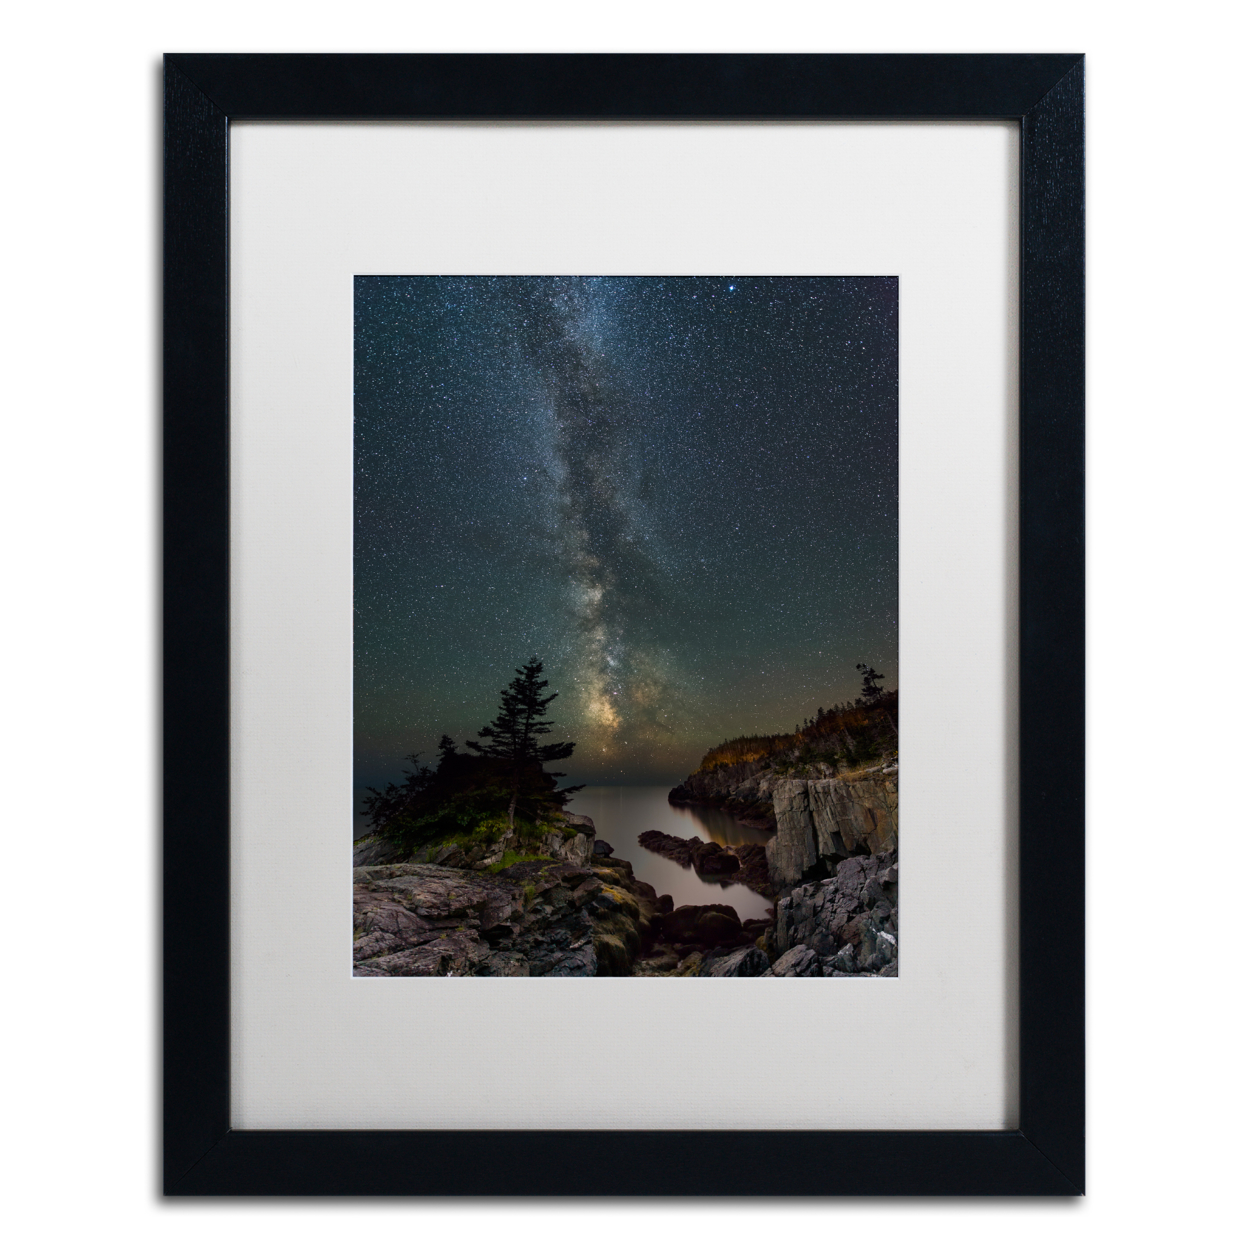 Michael Blanchette Photography 'Over The Chasm' Black Wooden Framed Art 18 X 22 Inches